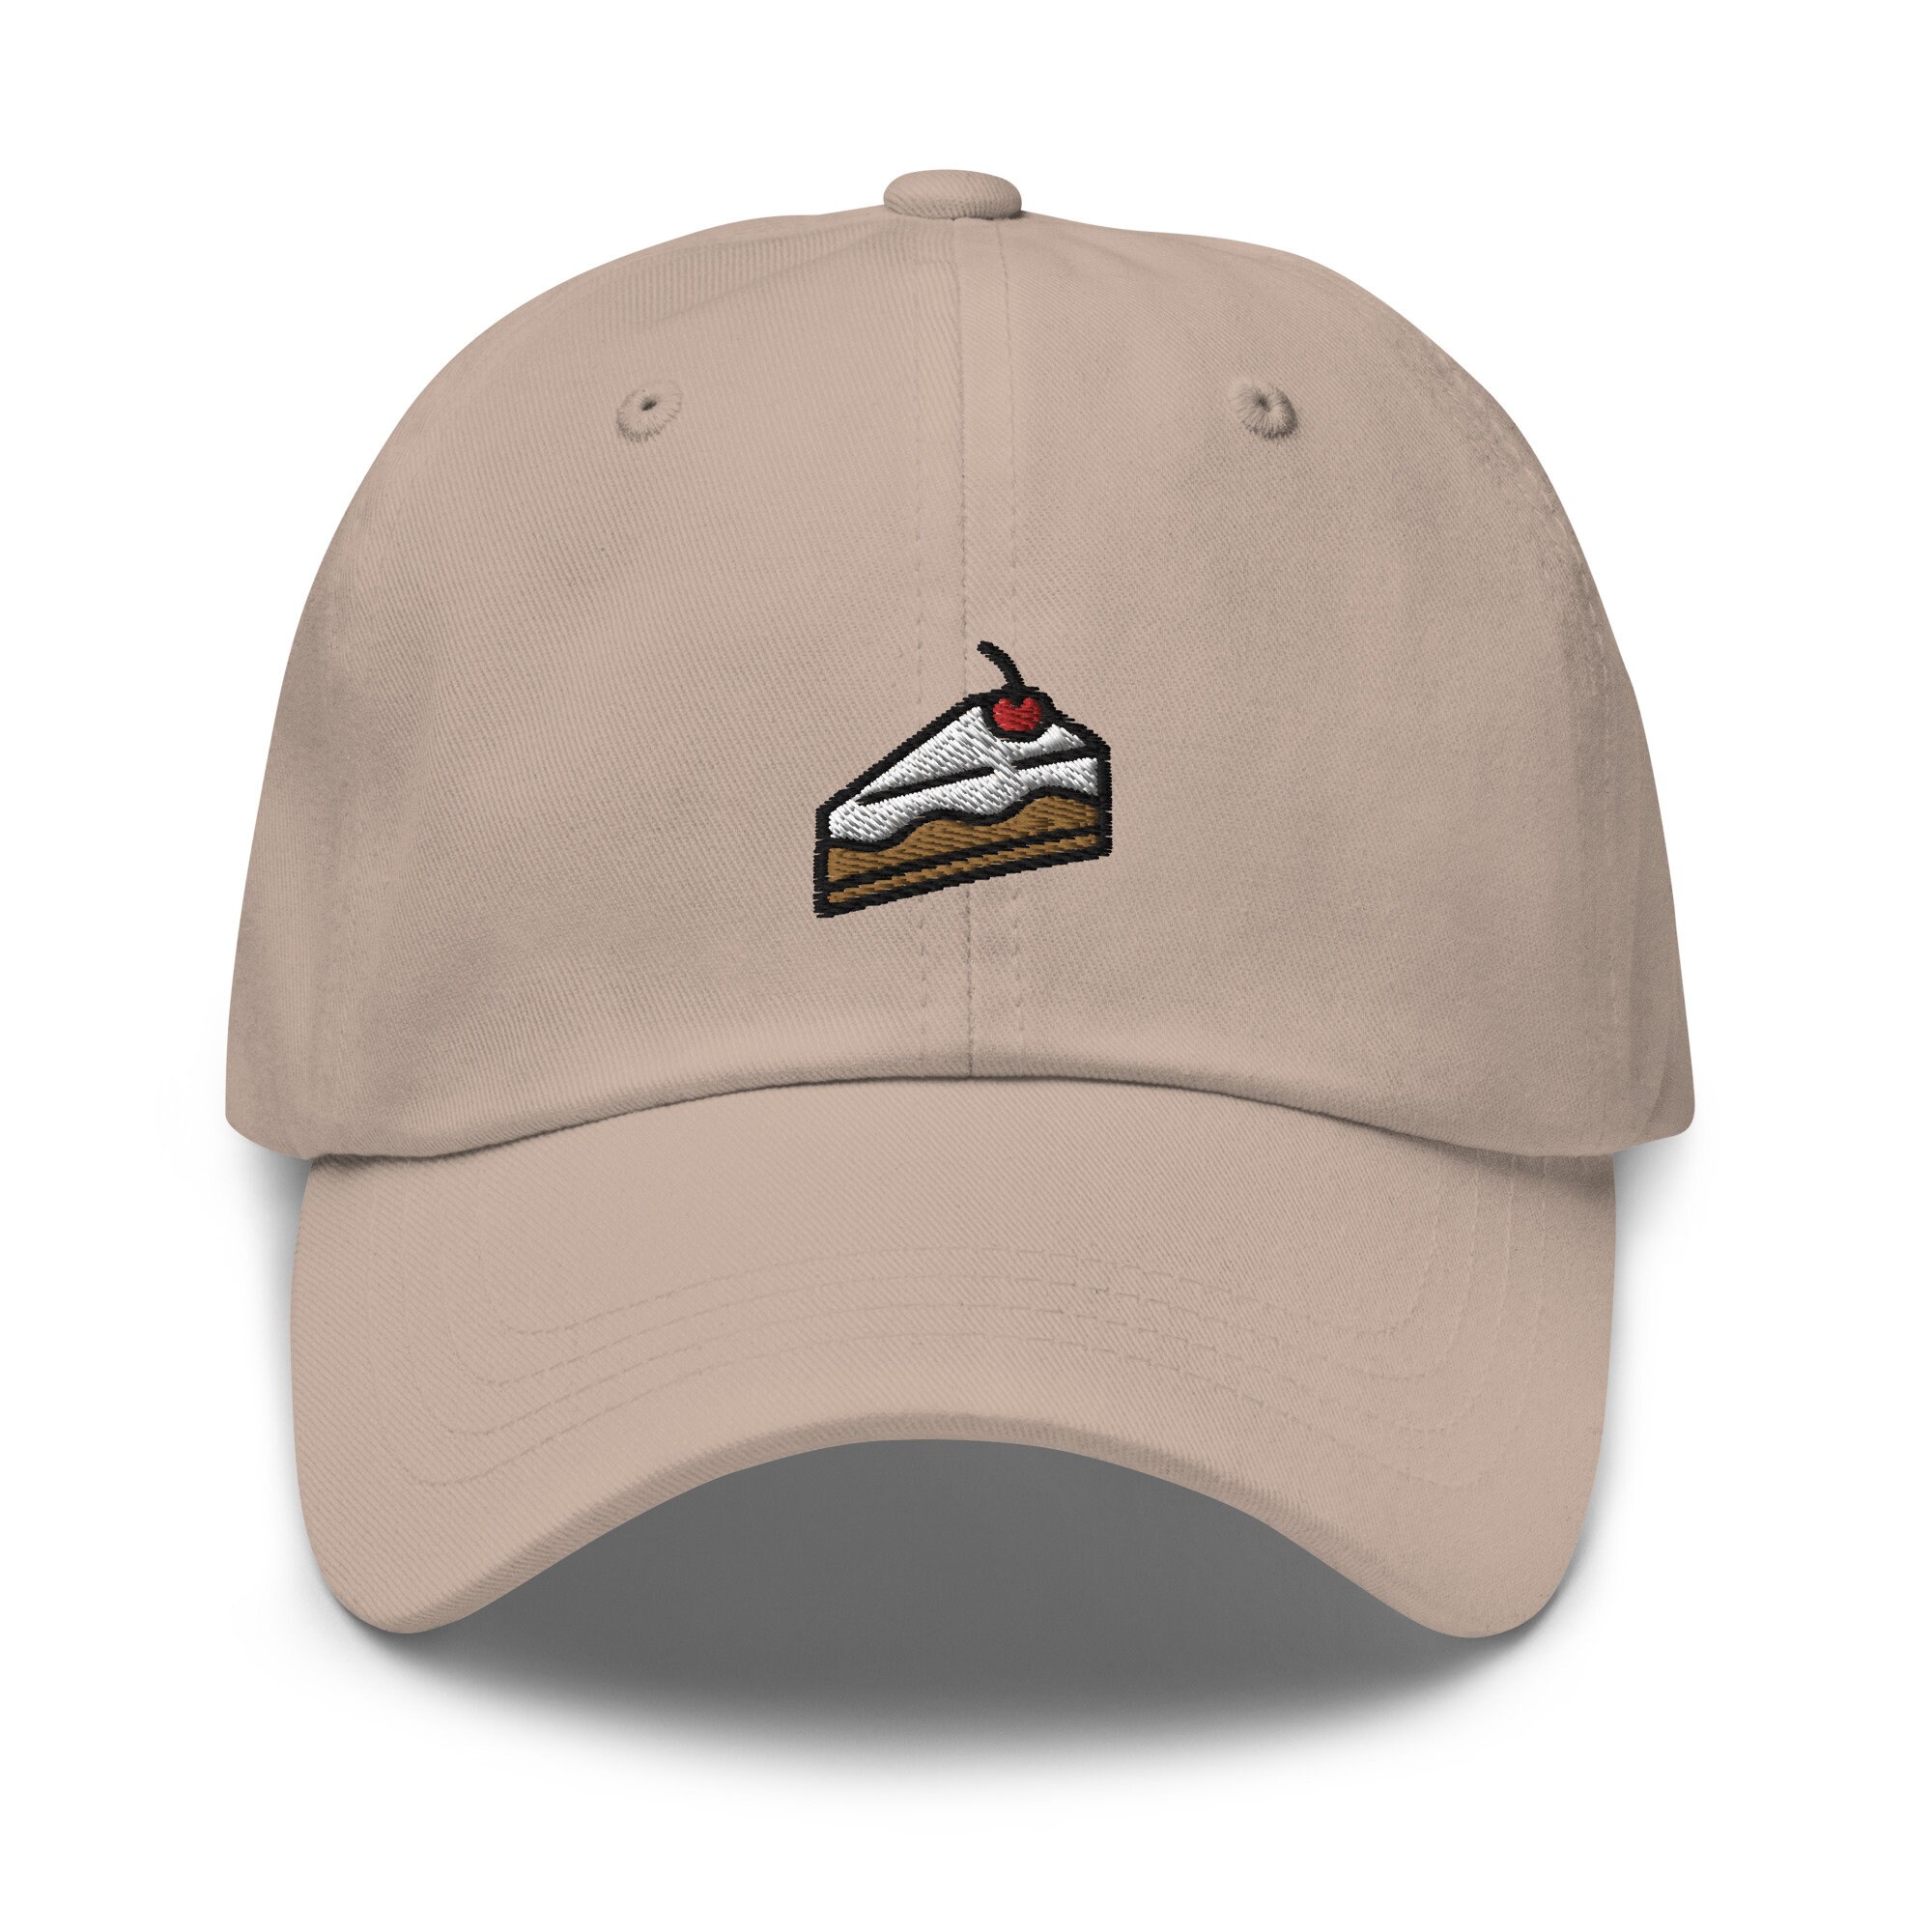 Concept One Bob's Burgers Embroidered Logo Cotton Adjustable Dad Hat with  Curved Brim, Black, One Size